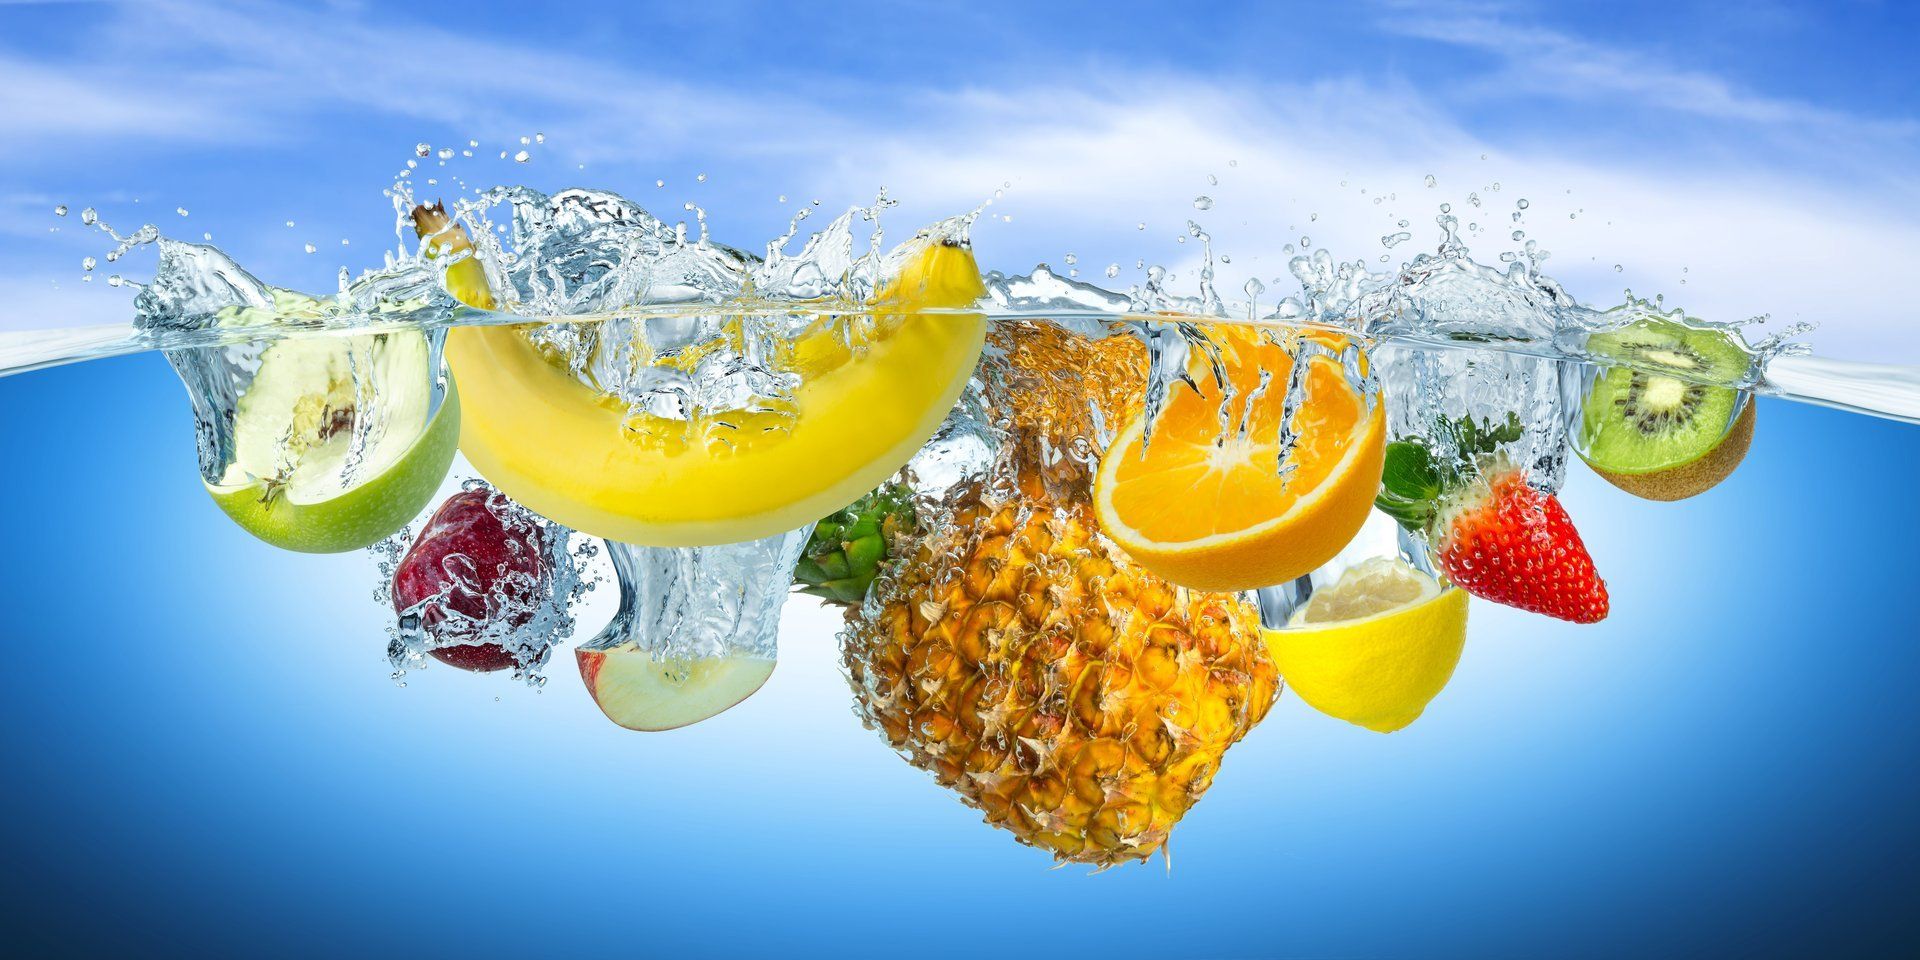 fruits splashes into water